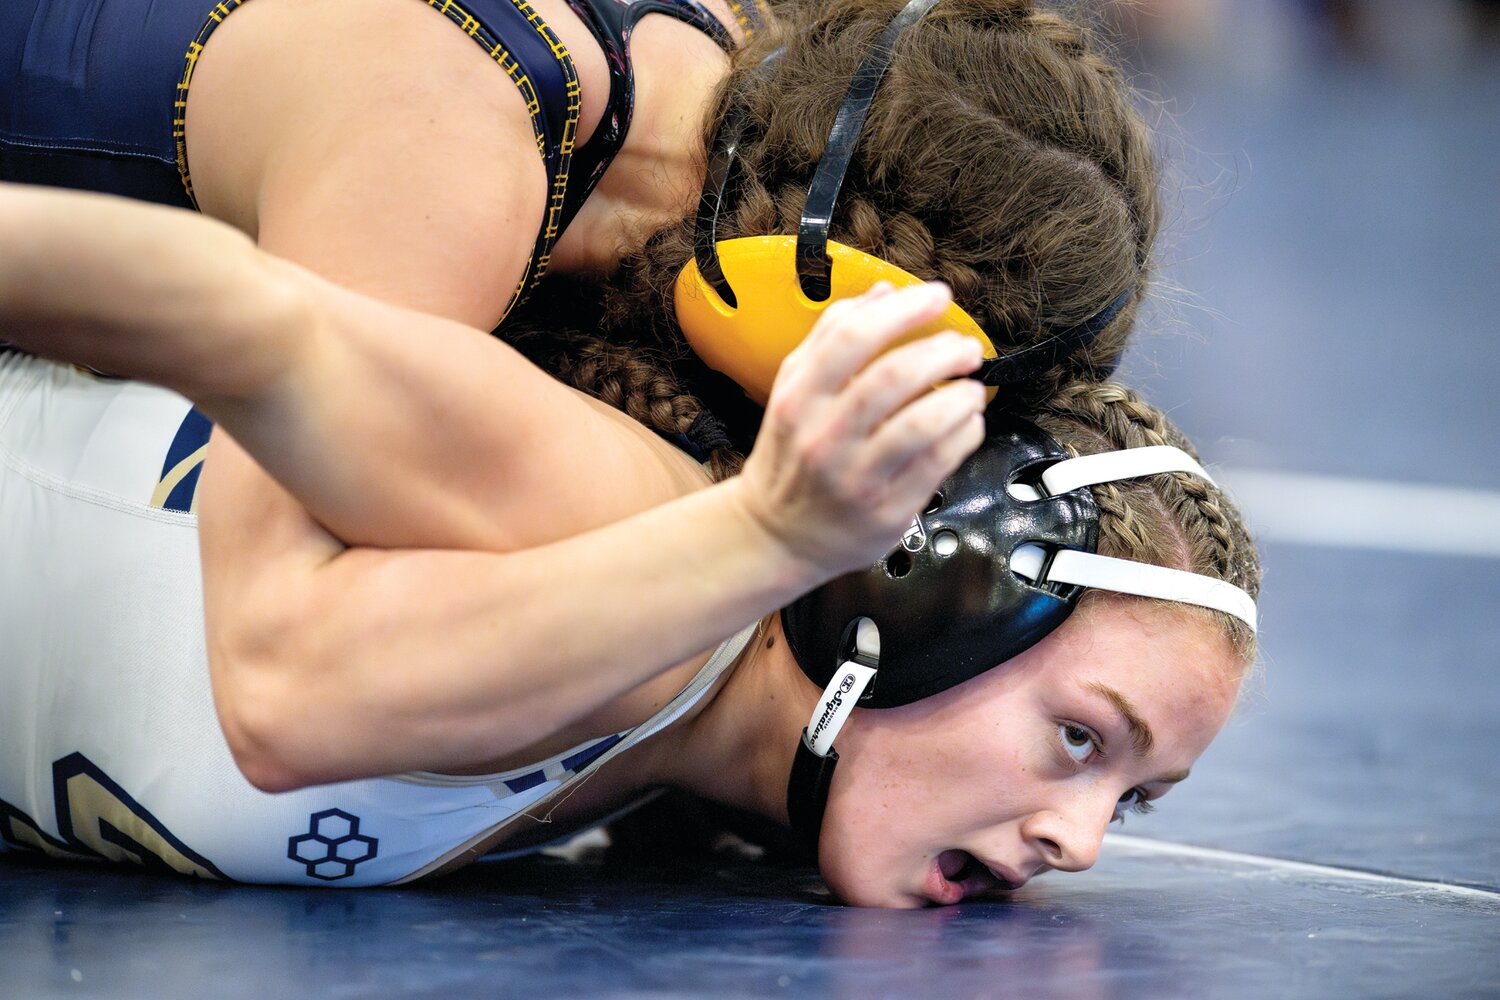 Council Rock South’s Chloe Windsor gets taken down by Cheltenham’s Ciara Rodriguez in the 142-pound class.